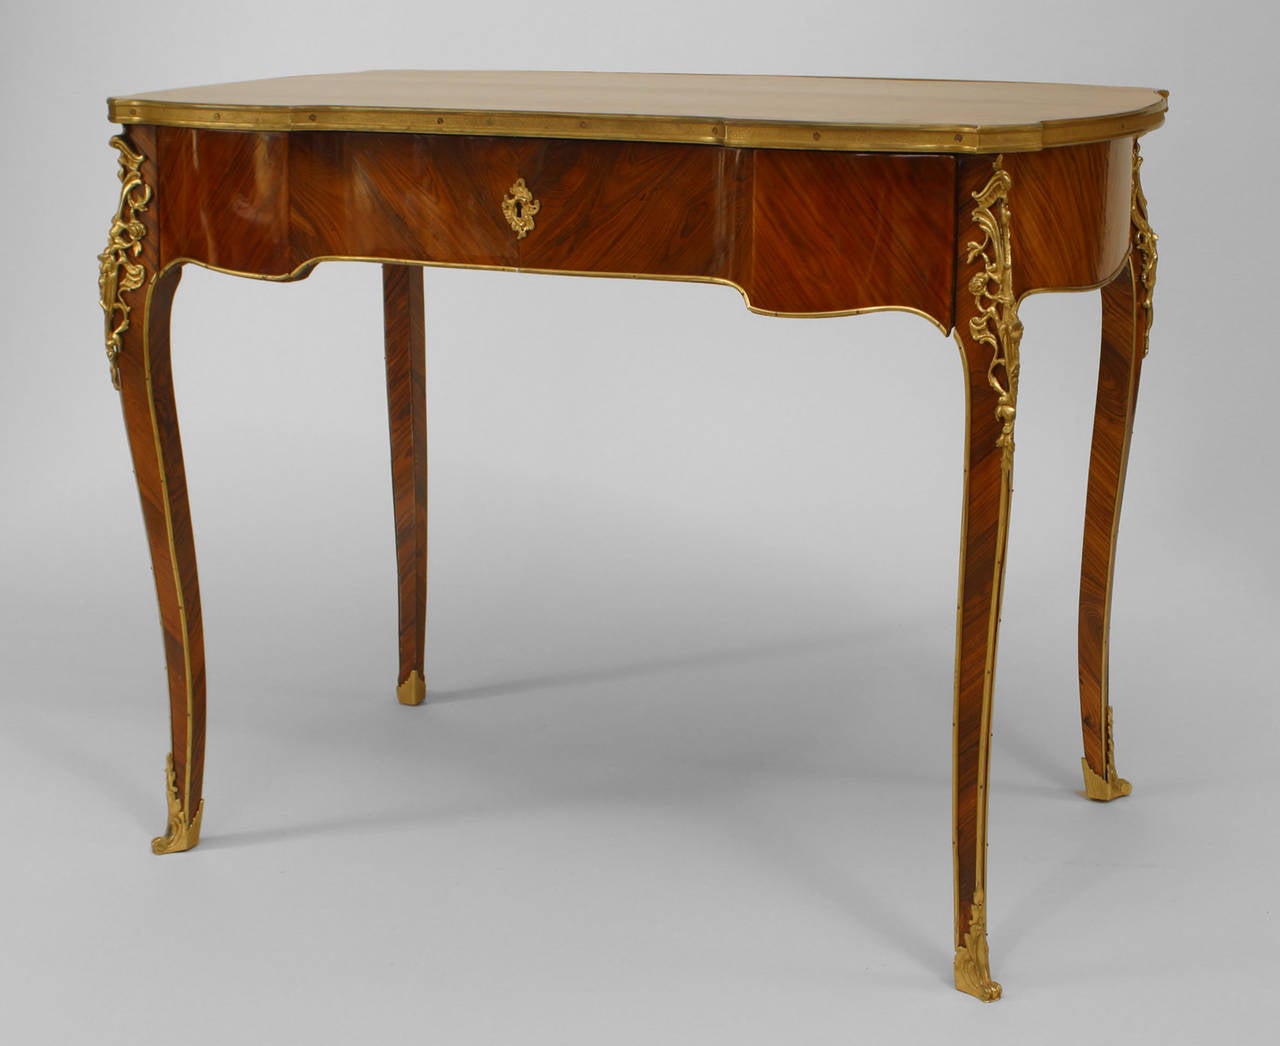 French Louis XV style (20th Century) desk with a parquetry inlaid top and gilt bronze trim with a single drawer.
